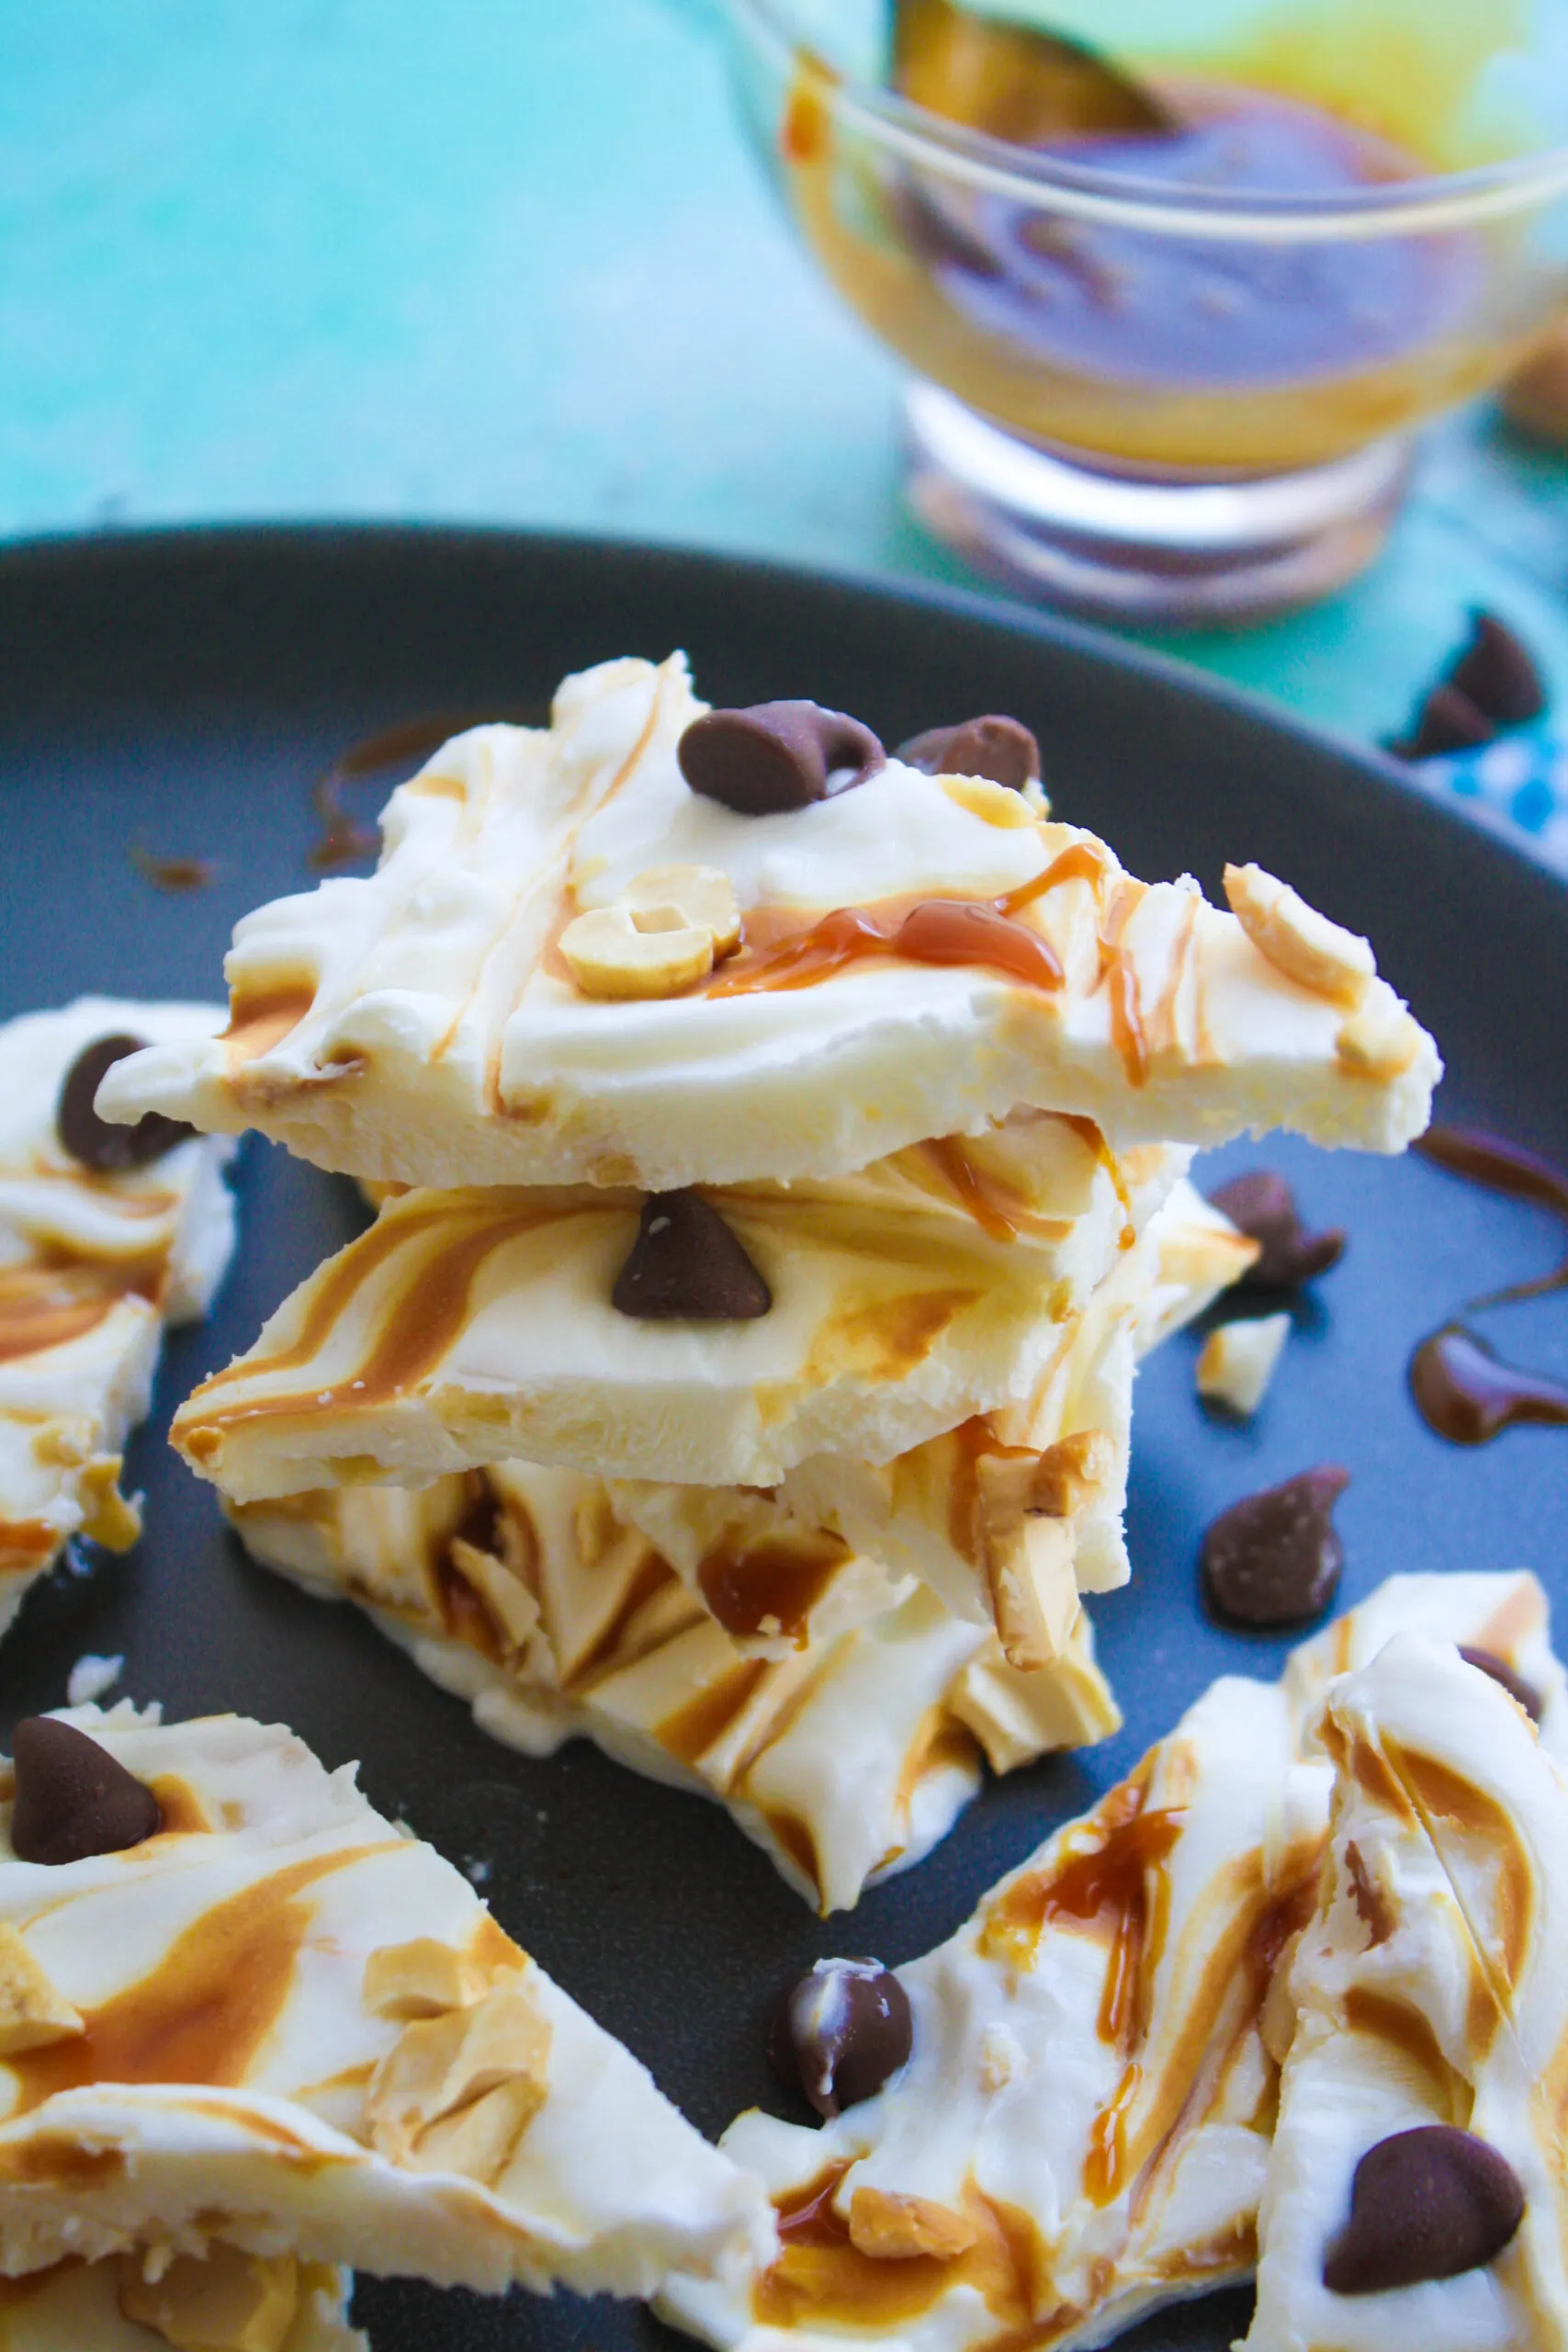 Frozen Yogurt Bark with Caramel, Cashews and Chocolate is a nice alternative to ice cream. And it's so easy to make!